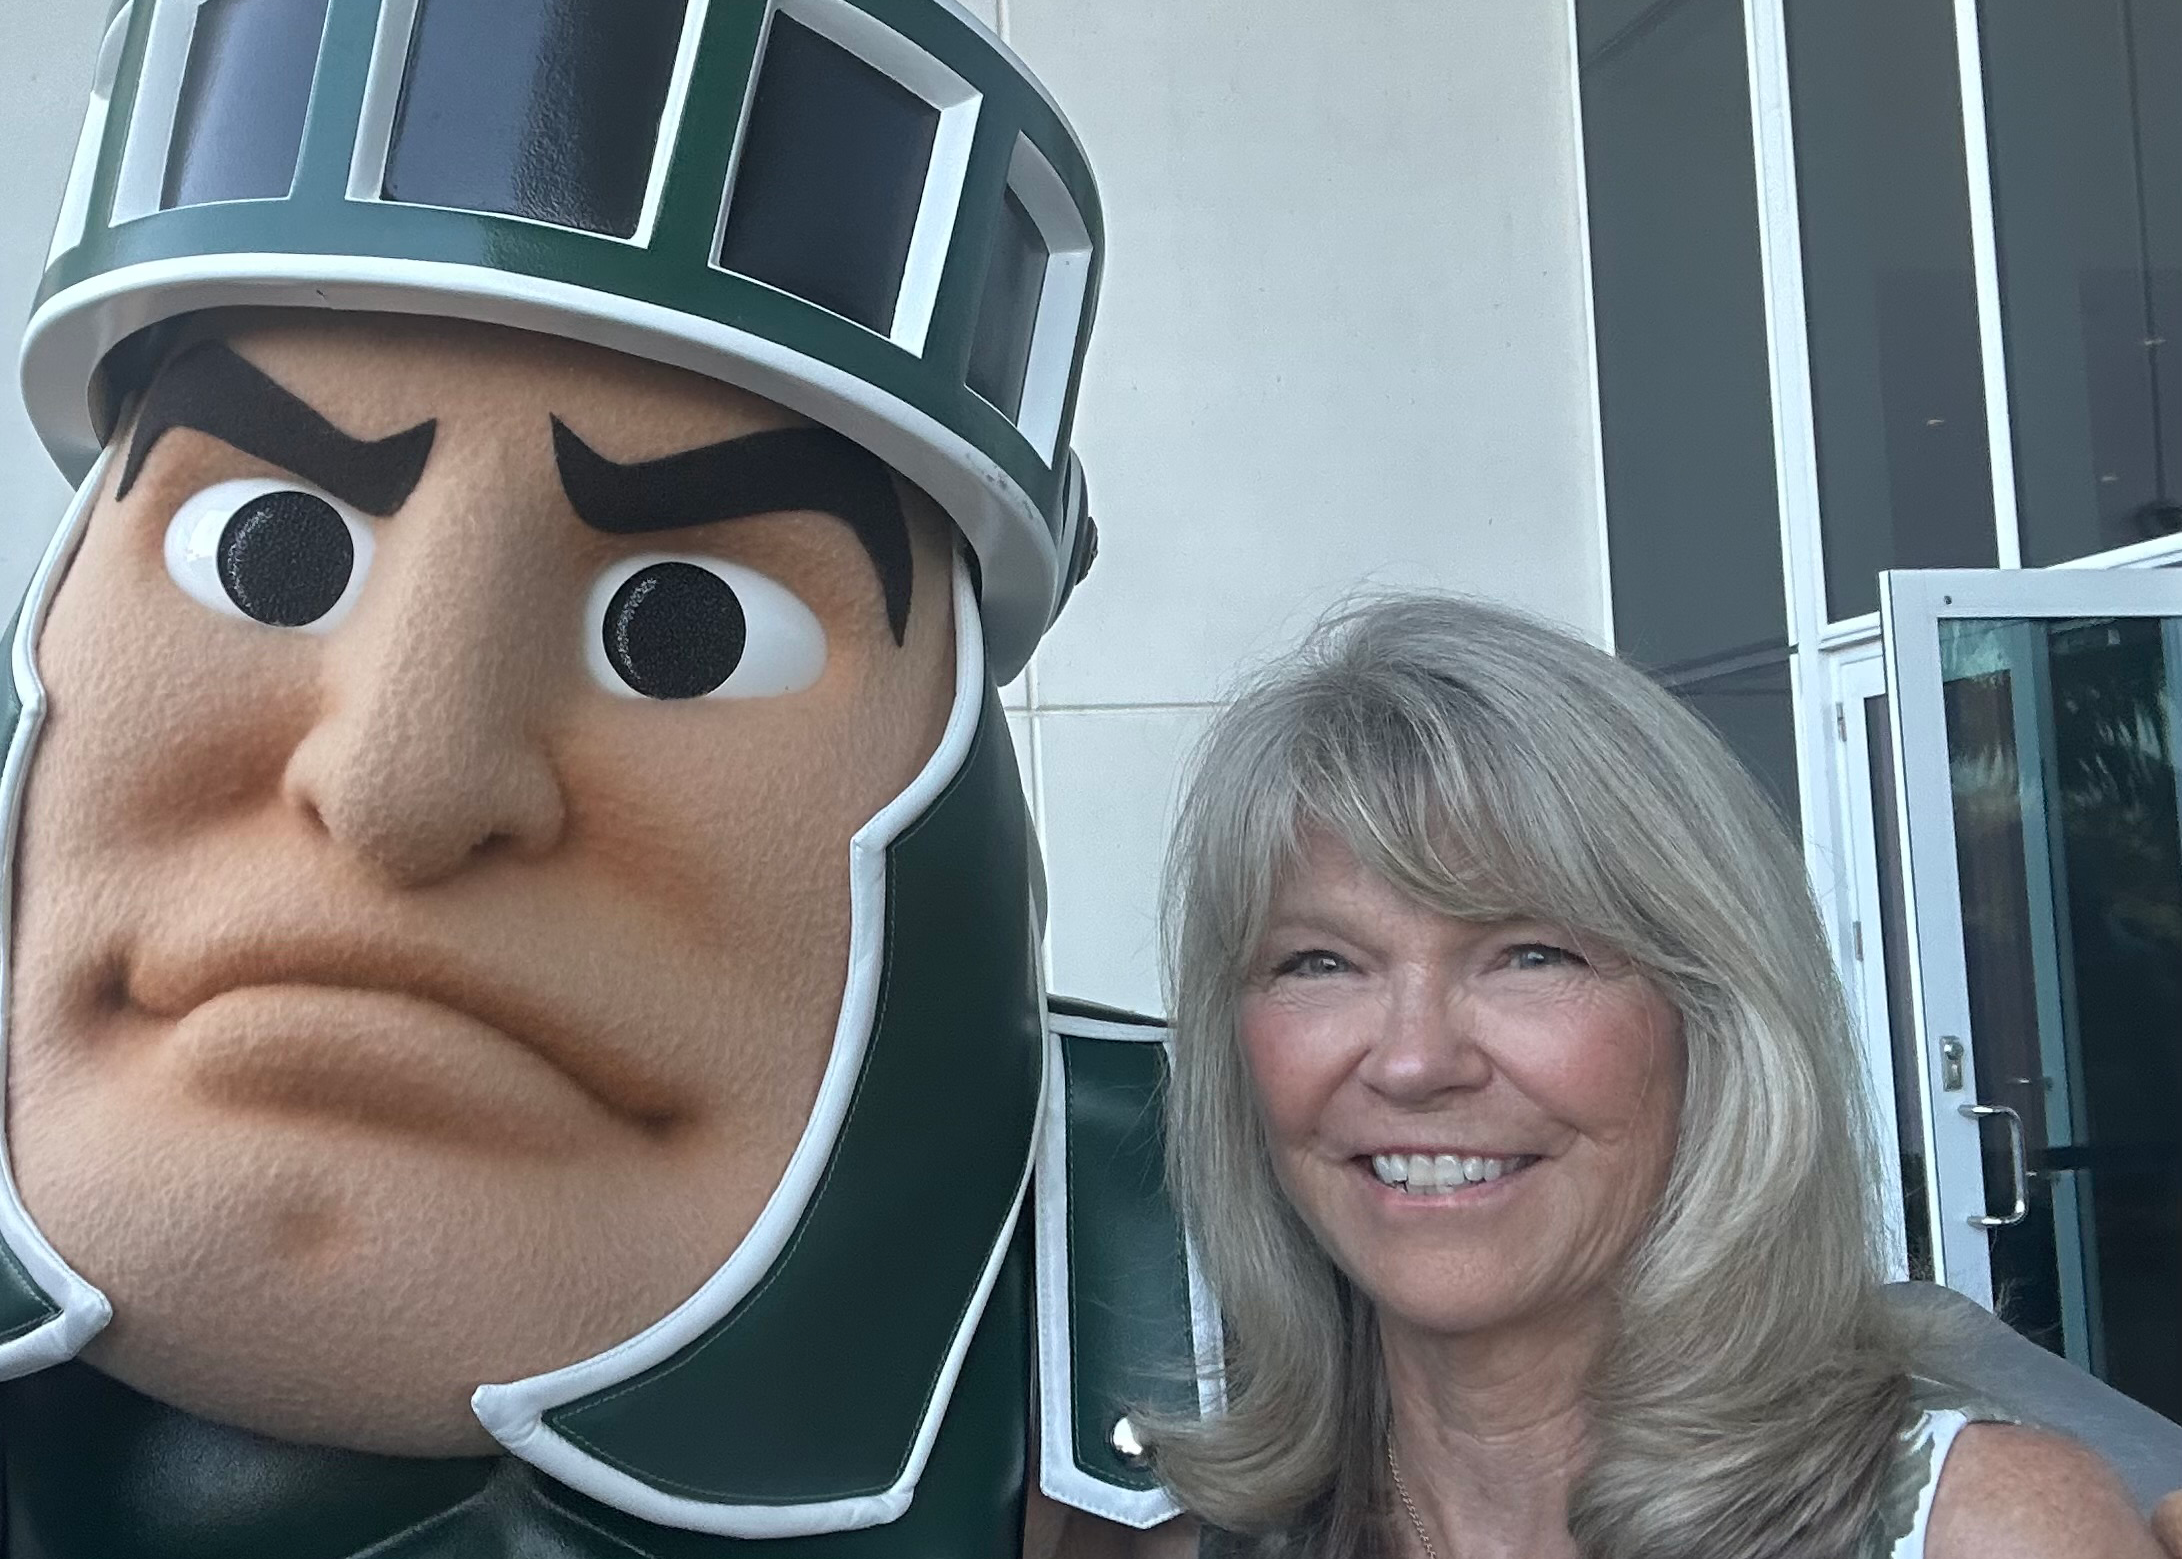 Nancy King Reame, a College of Nursing alumna, takes a selfie with Sparty, MSU's mascot, in front of a stone building.